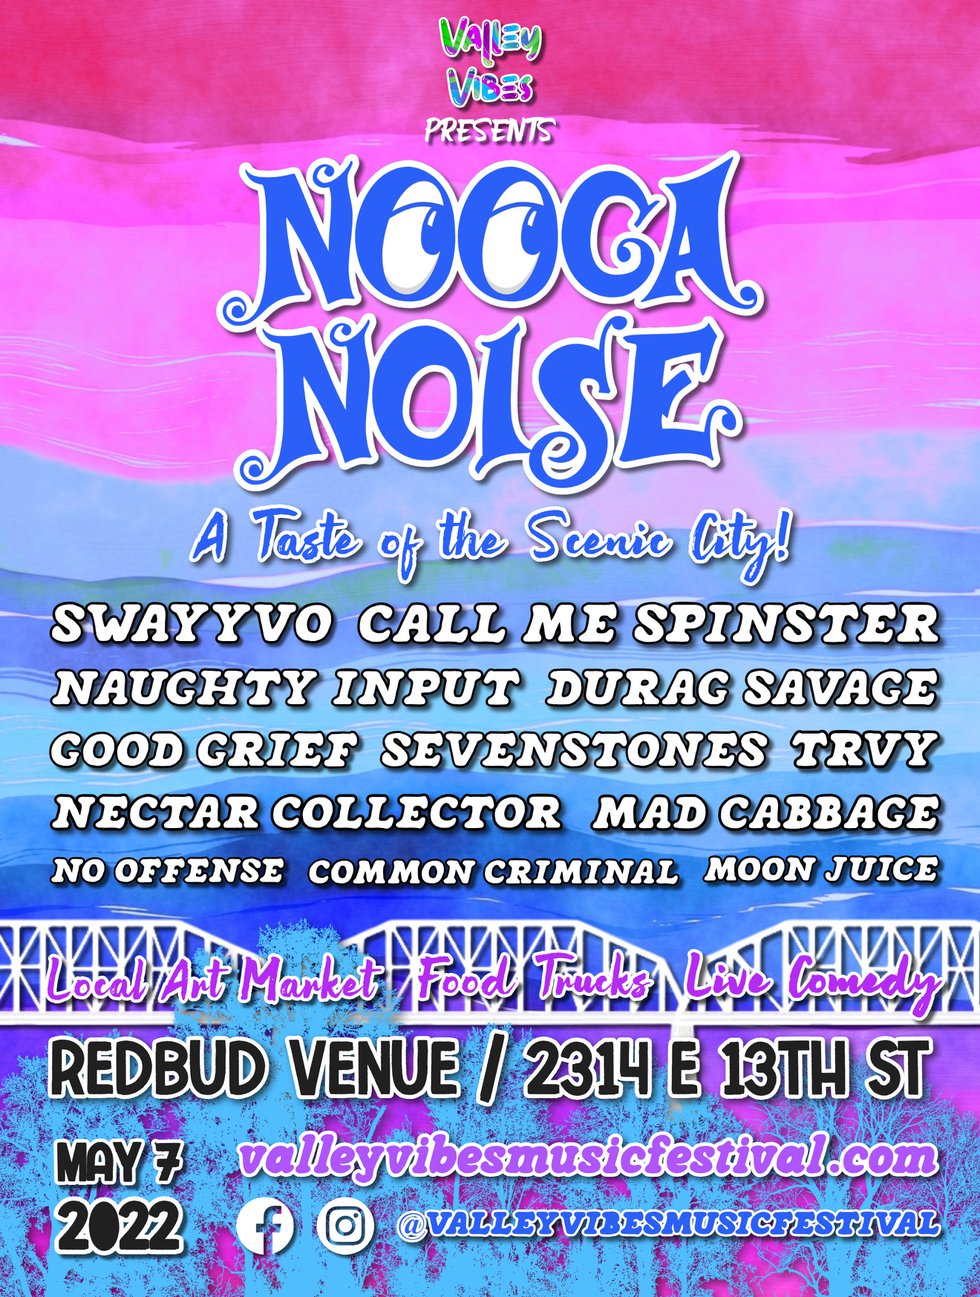 Nooga Noise Lineup Poster.jpg